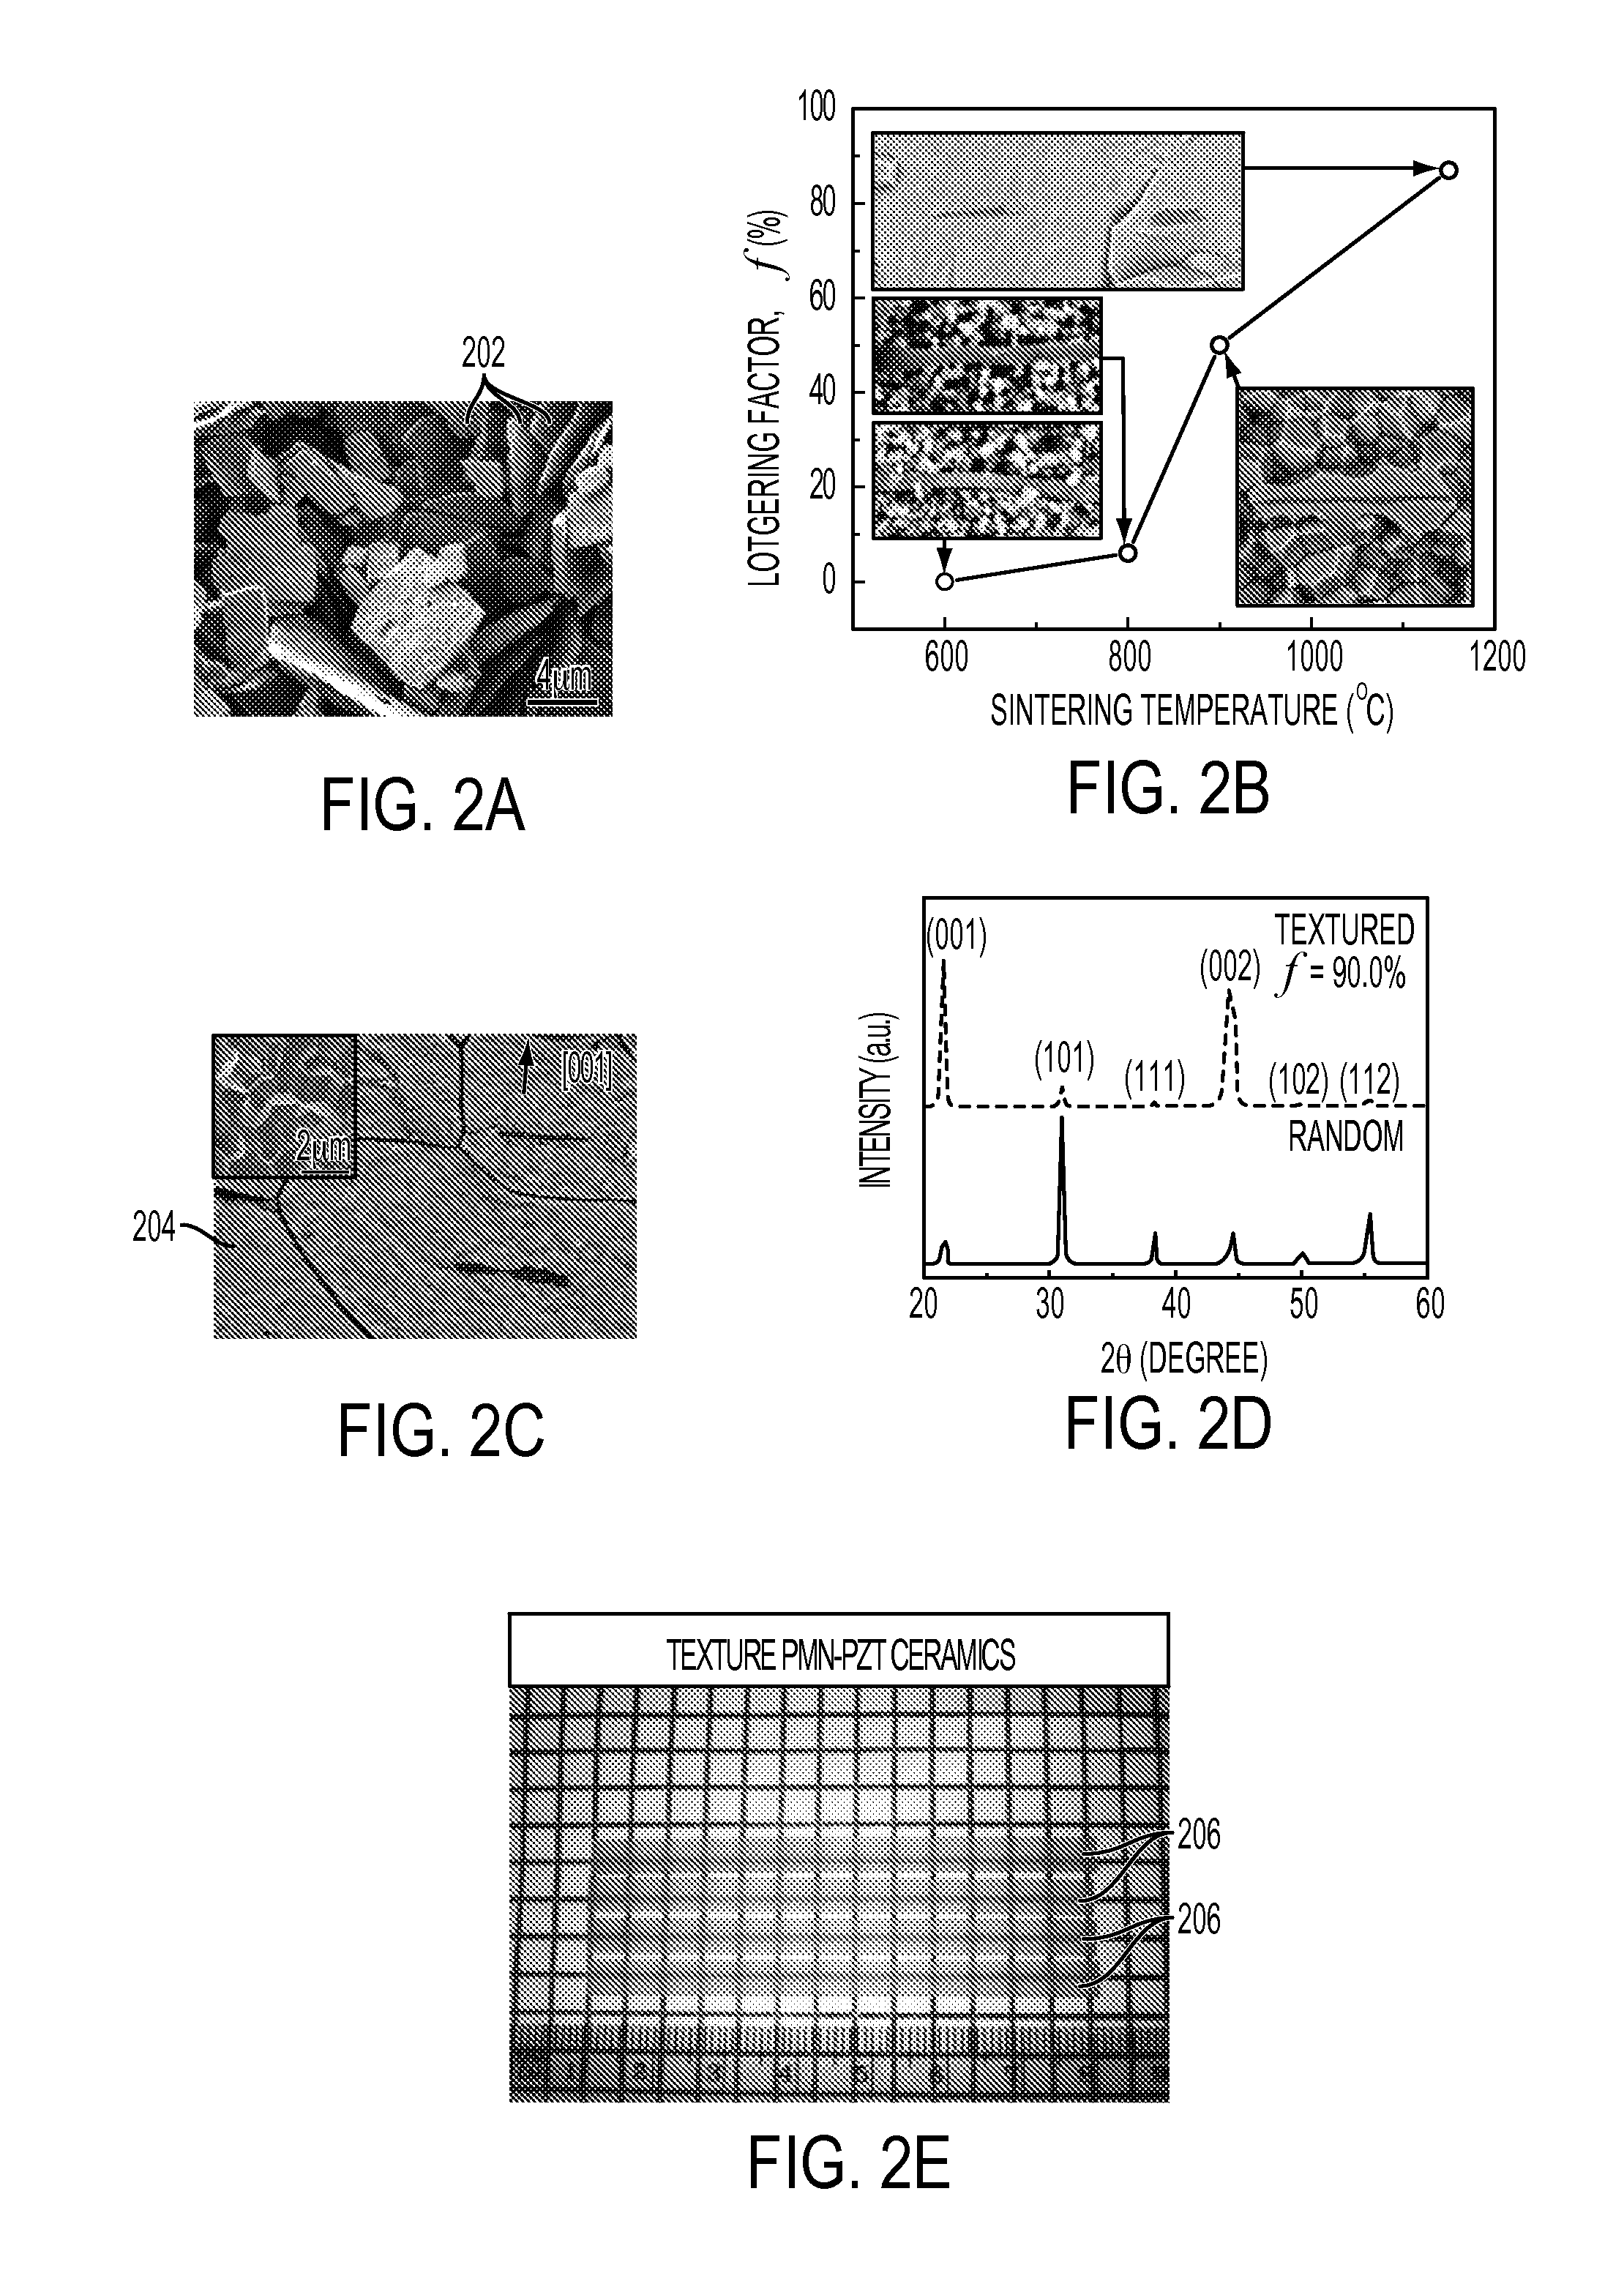 High performance textured piezoelectric ceramics and method for manufacturing same